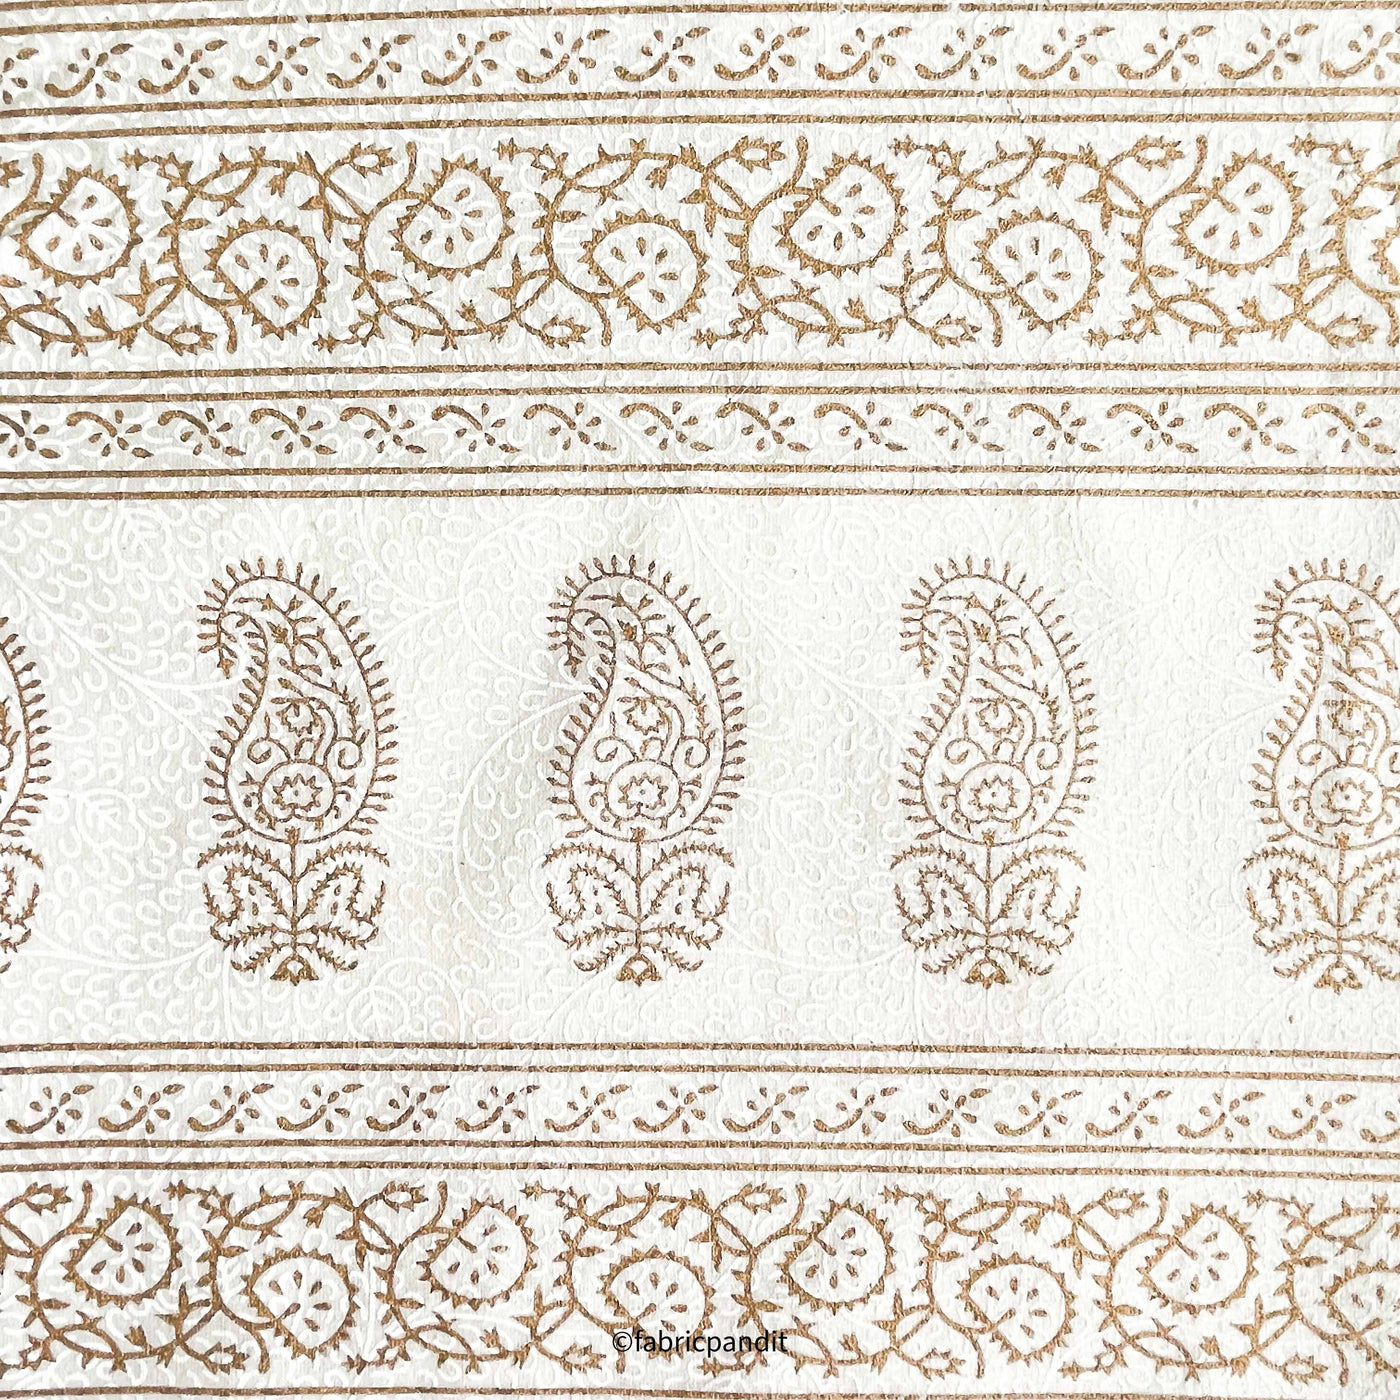 Fabric Pandit Fabric White & Gold Mughal Paisley Hand Block Printed Pure Cotton Table Cover